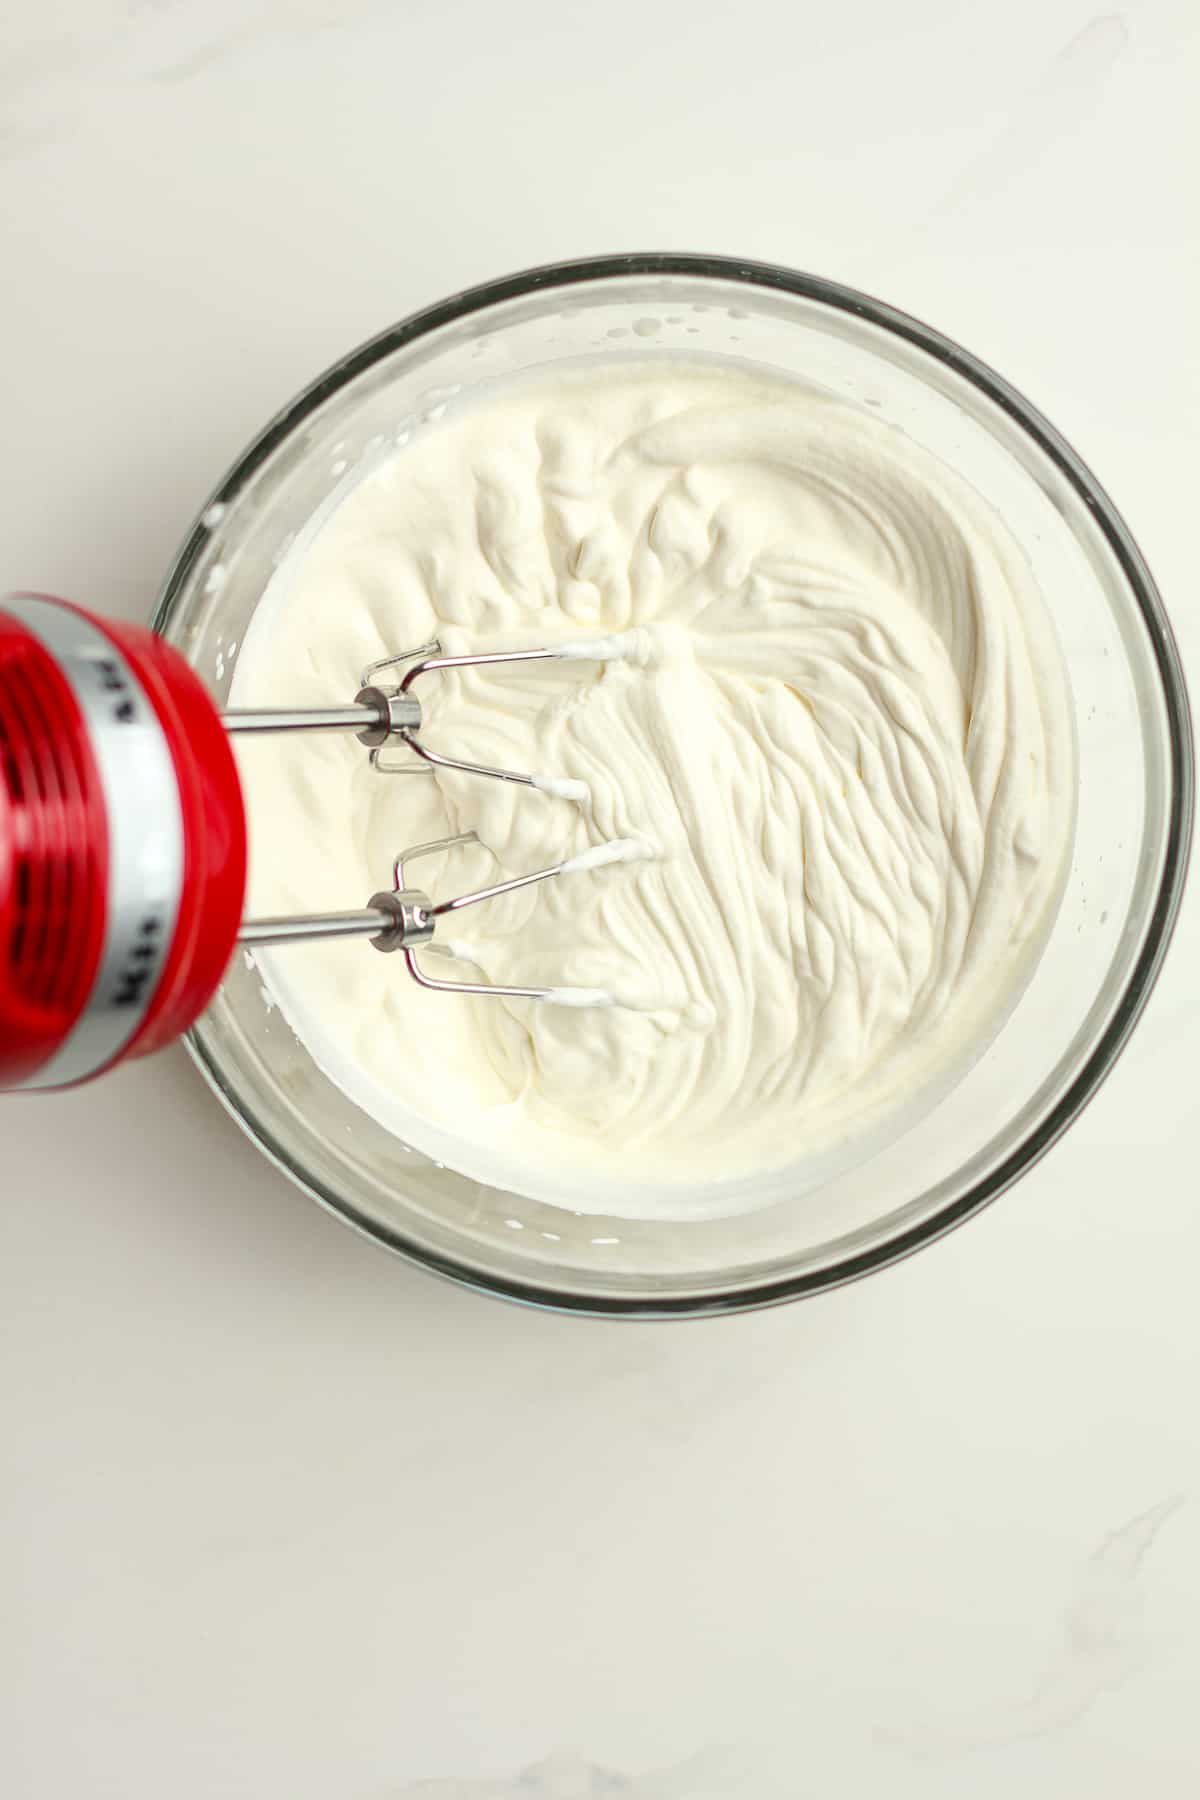 The homemade whipping cream in a bowl.